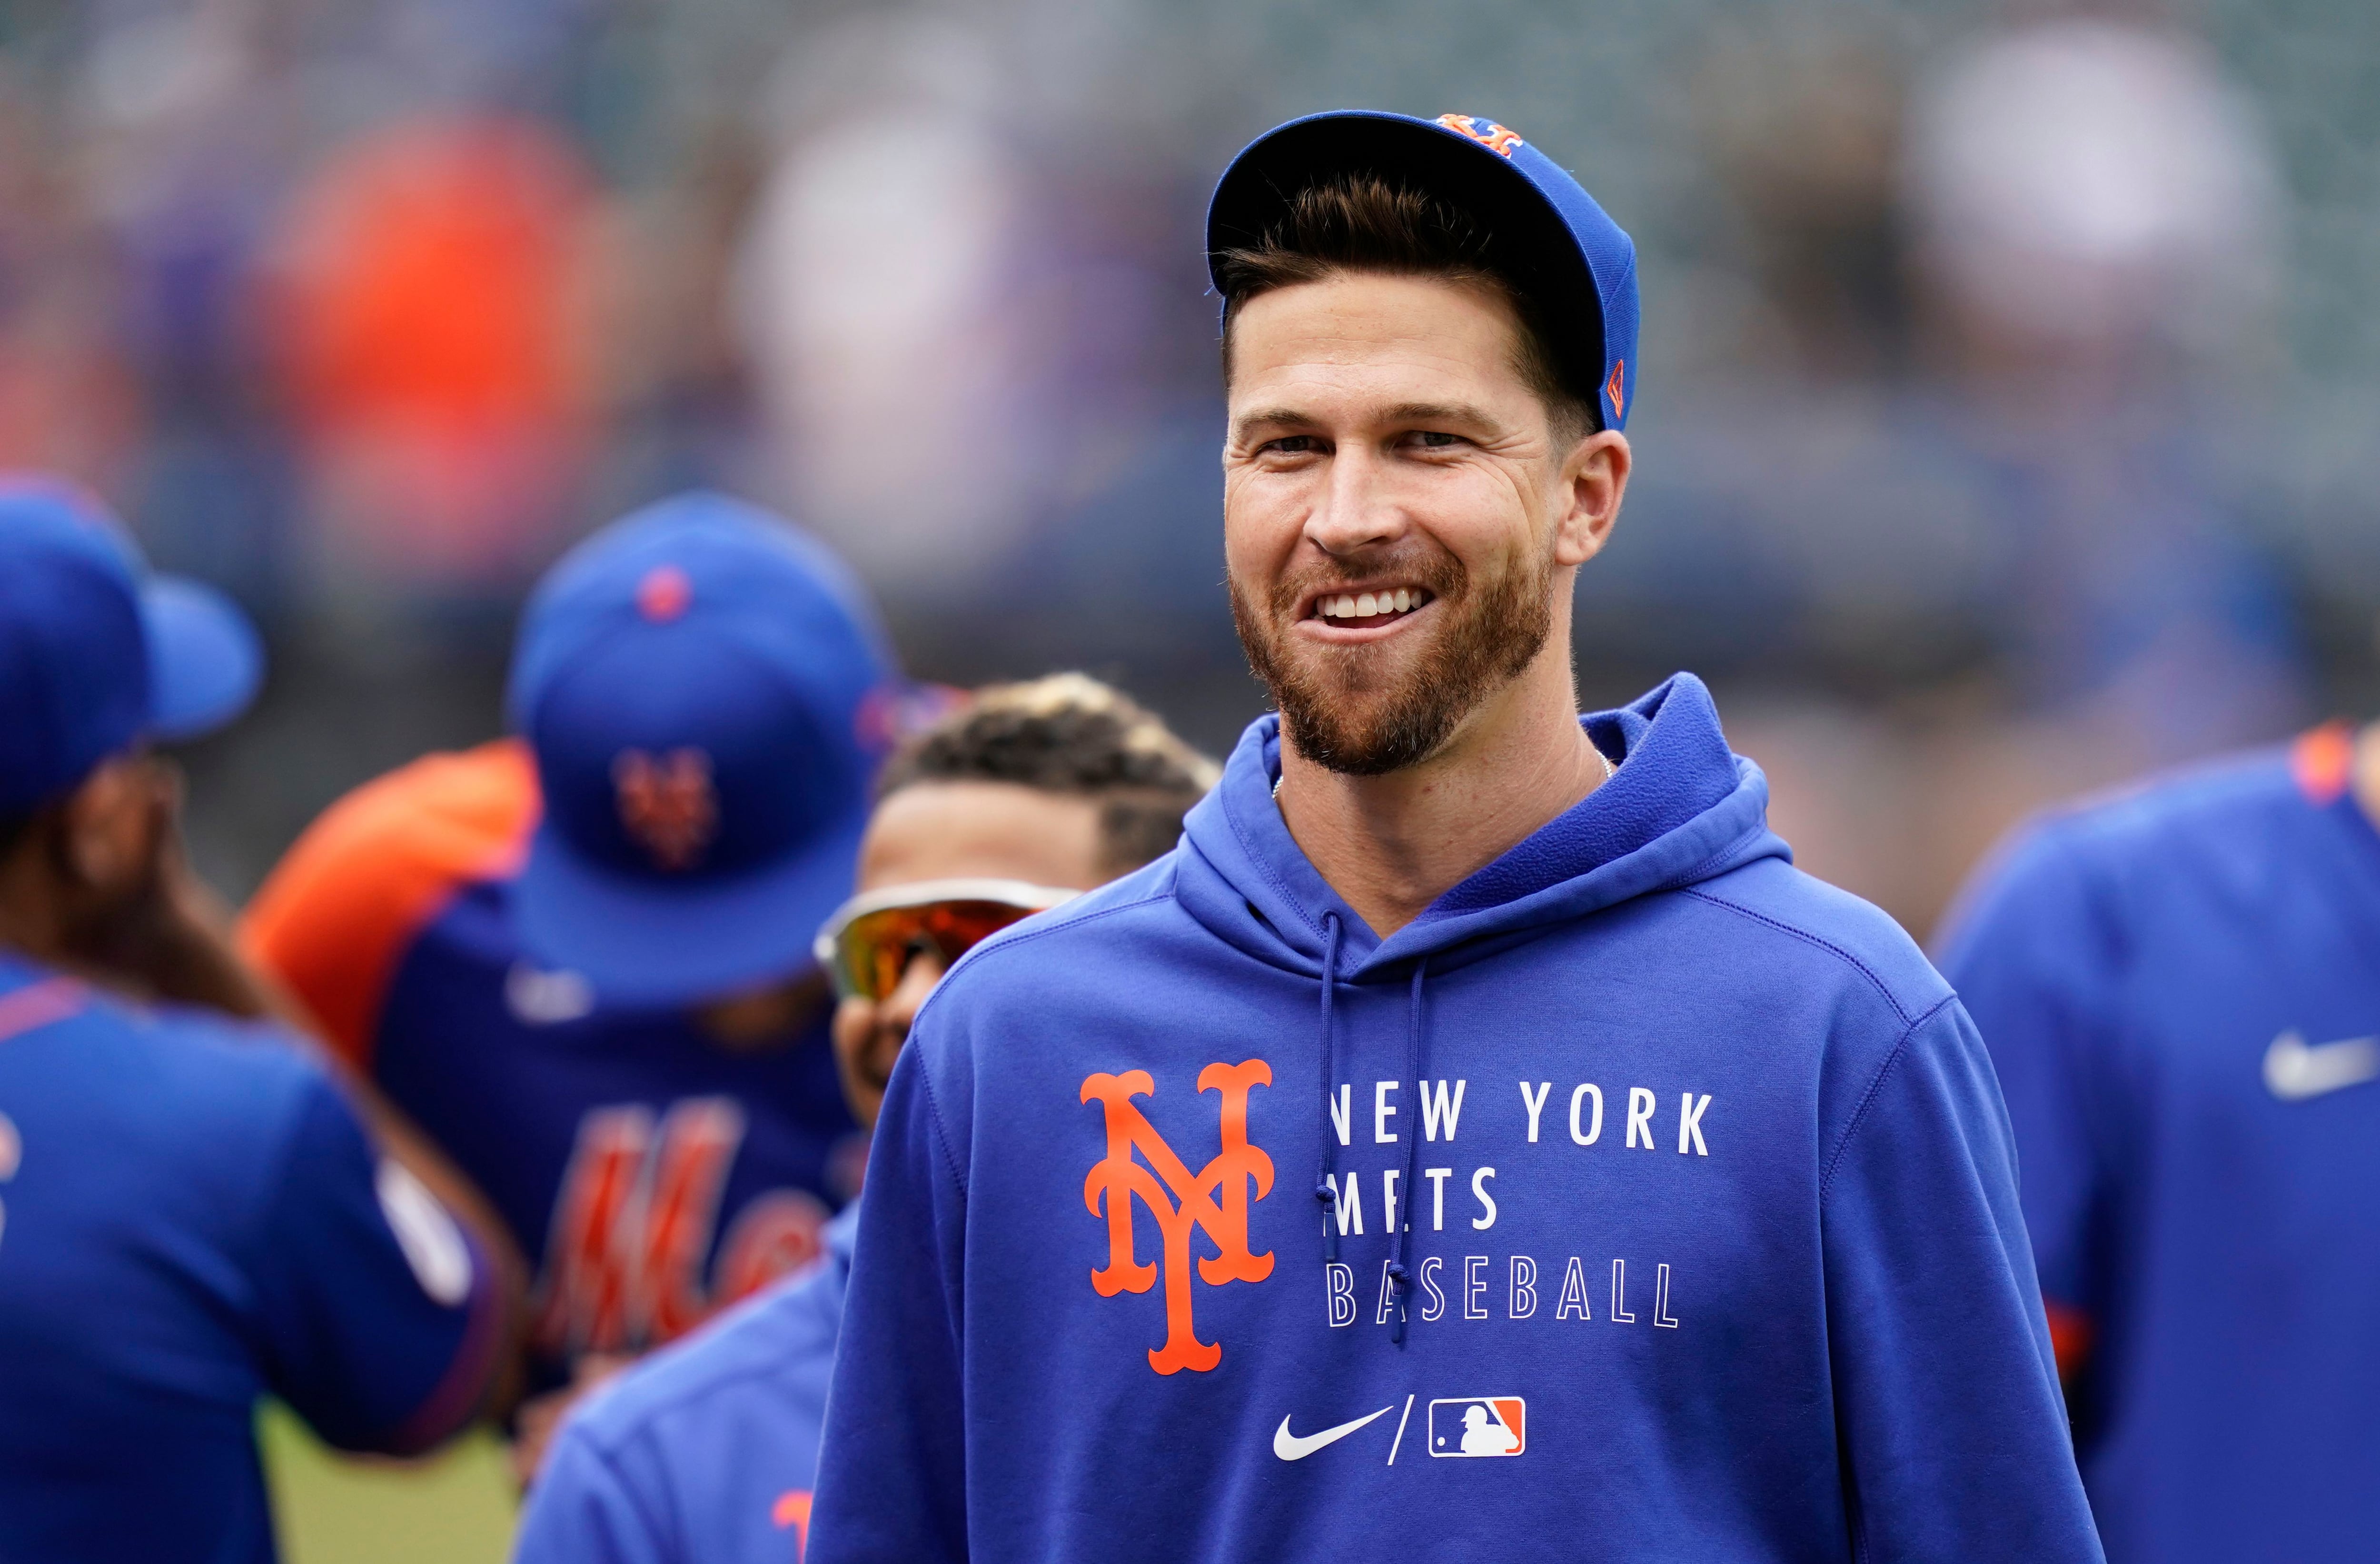 Jacob deGrom of NY Mets named to All-Star team for second time